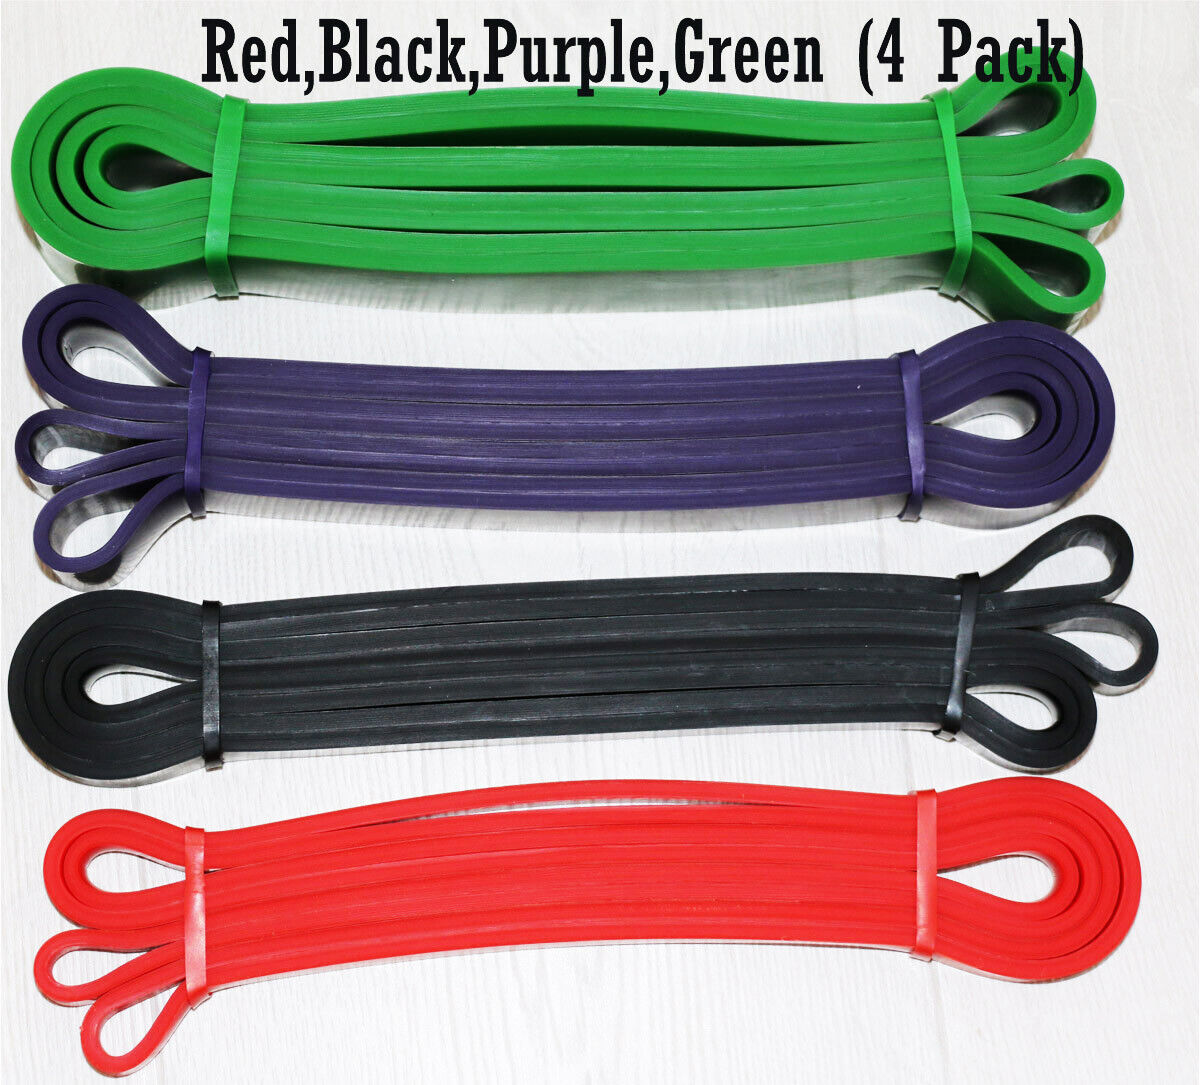 Heavy Duty Resistance Bands Uk, Pull Up Bands